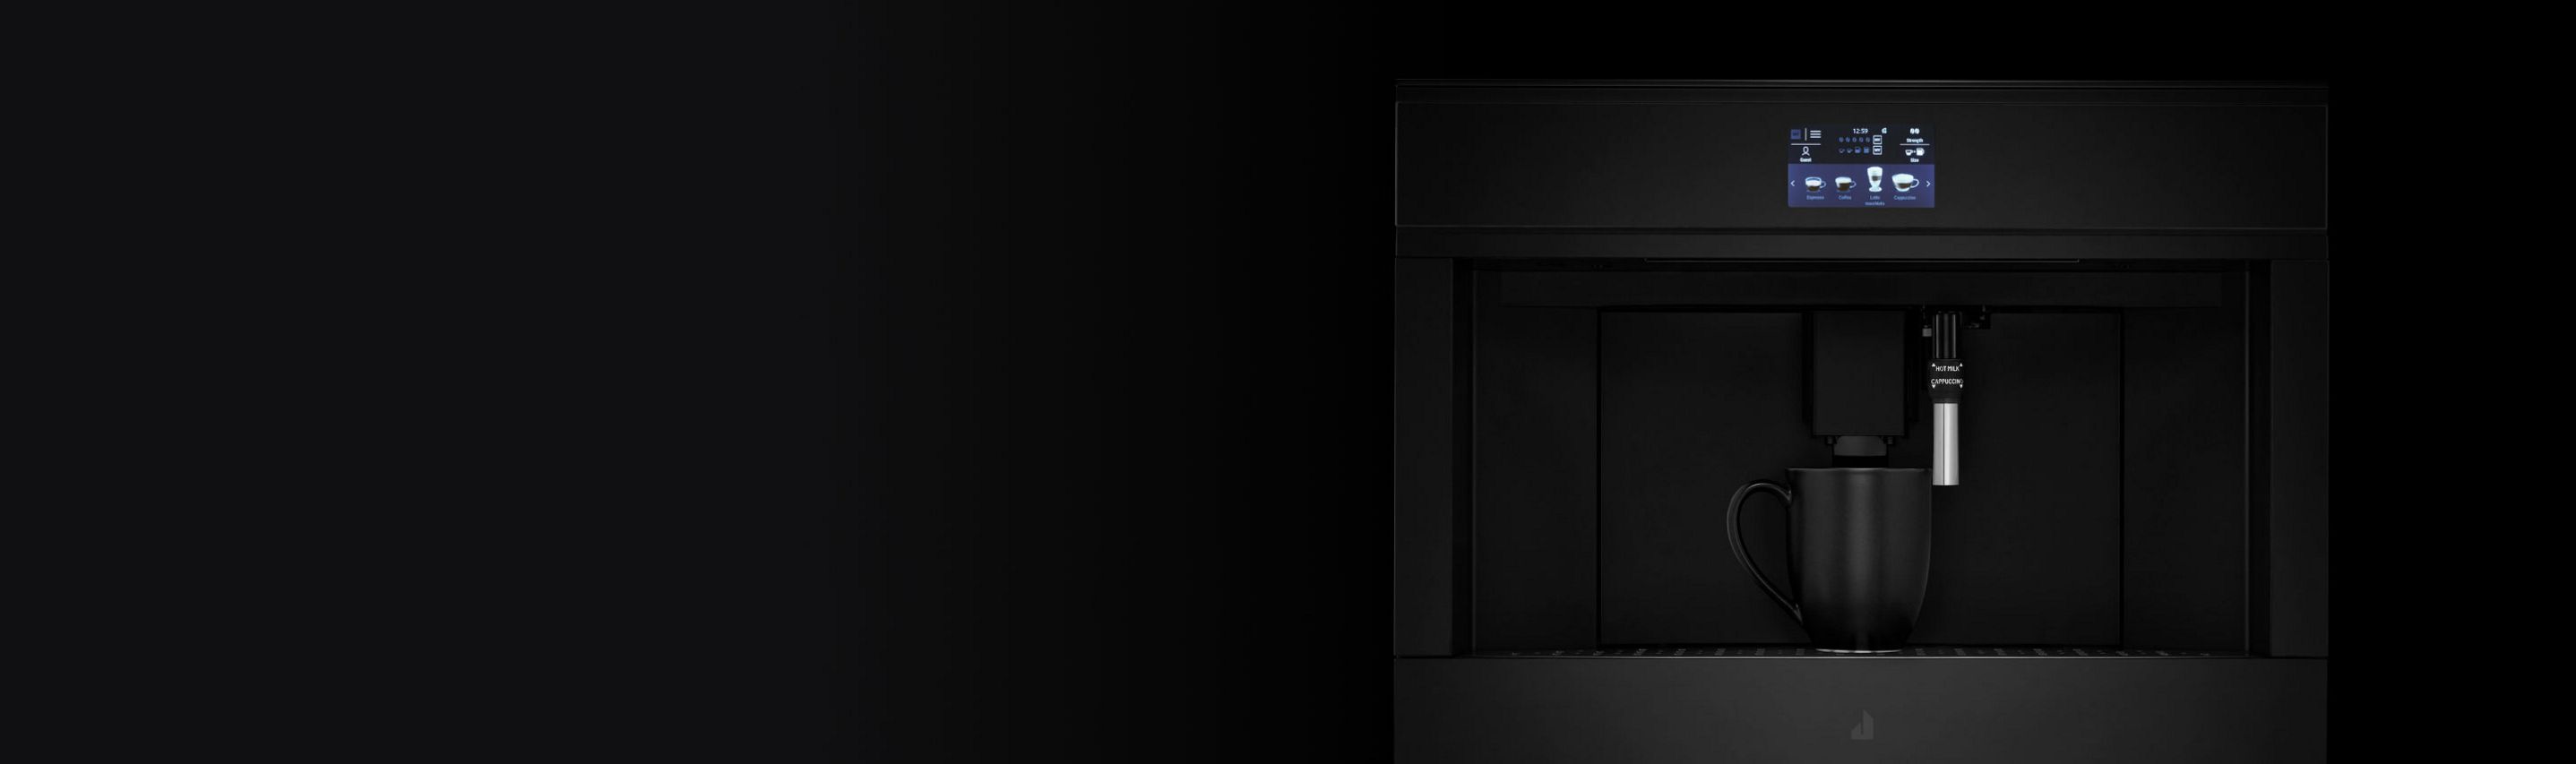 A JennAir Built-In Coffee Machine in the NOIR™ Design Expression.